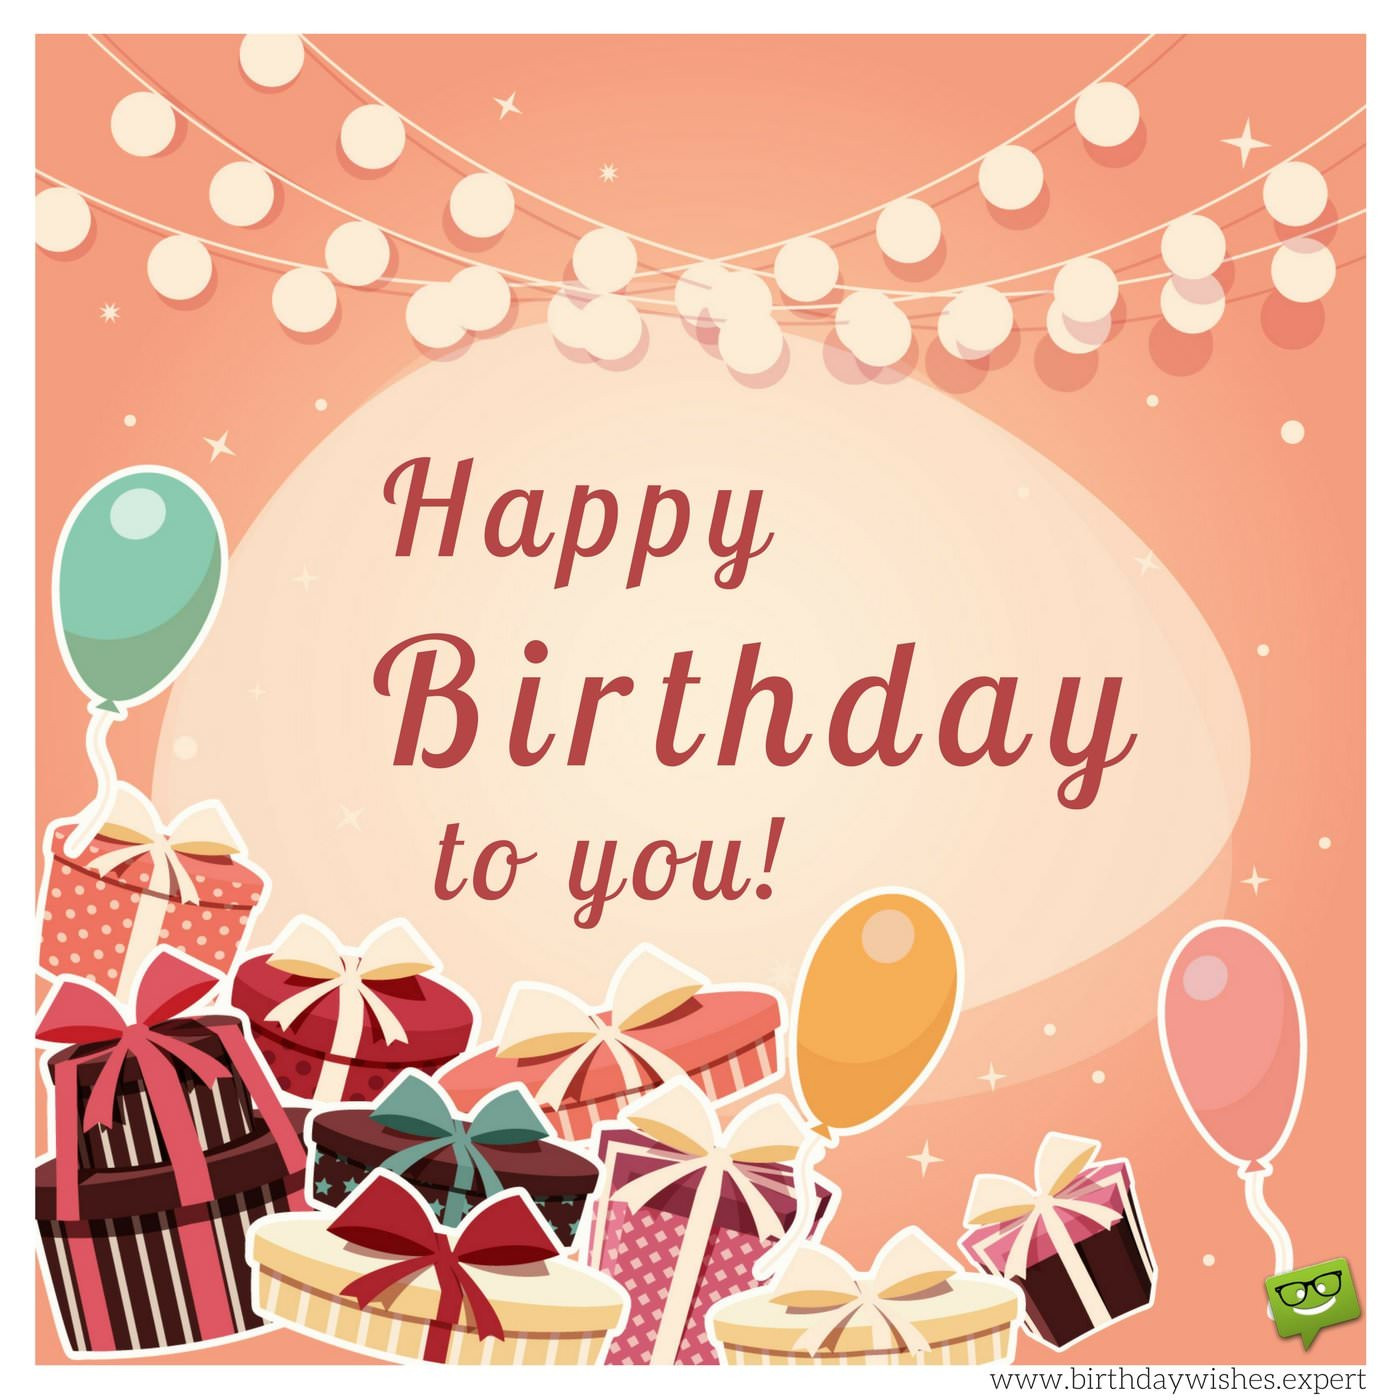 Facebook Birthday Wishes
 Happy Birthday Wishes for your Friends